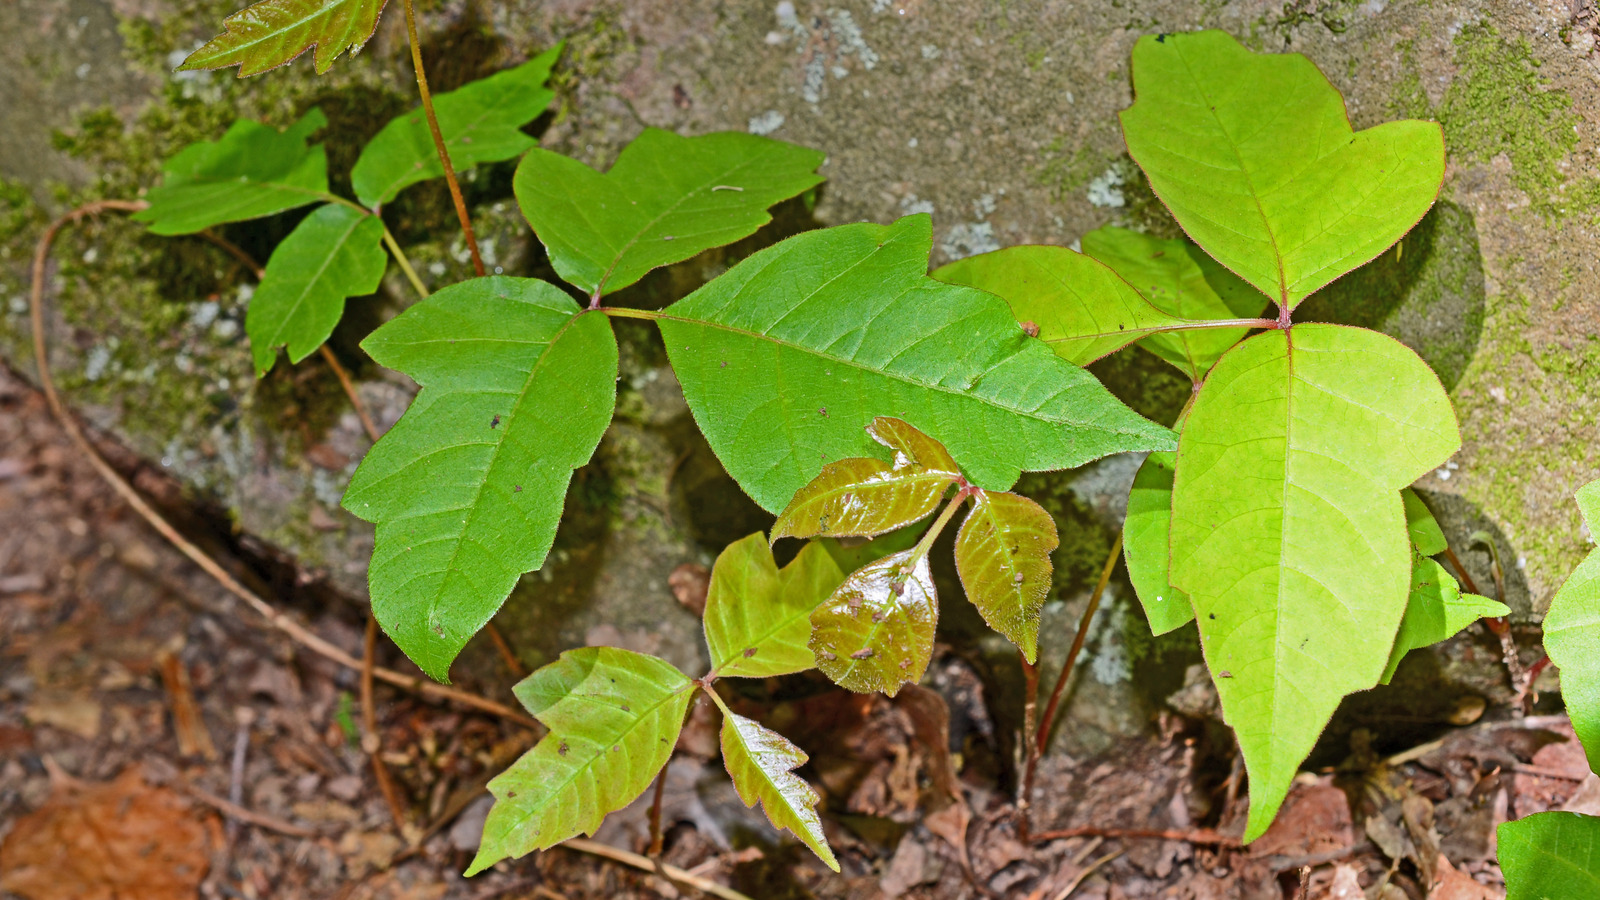 Poison Oak Vs Poison Ivy: What's The Difference?